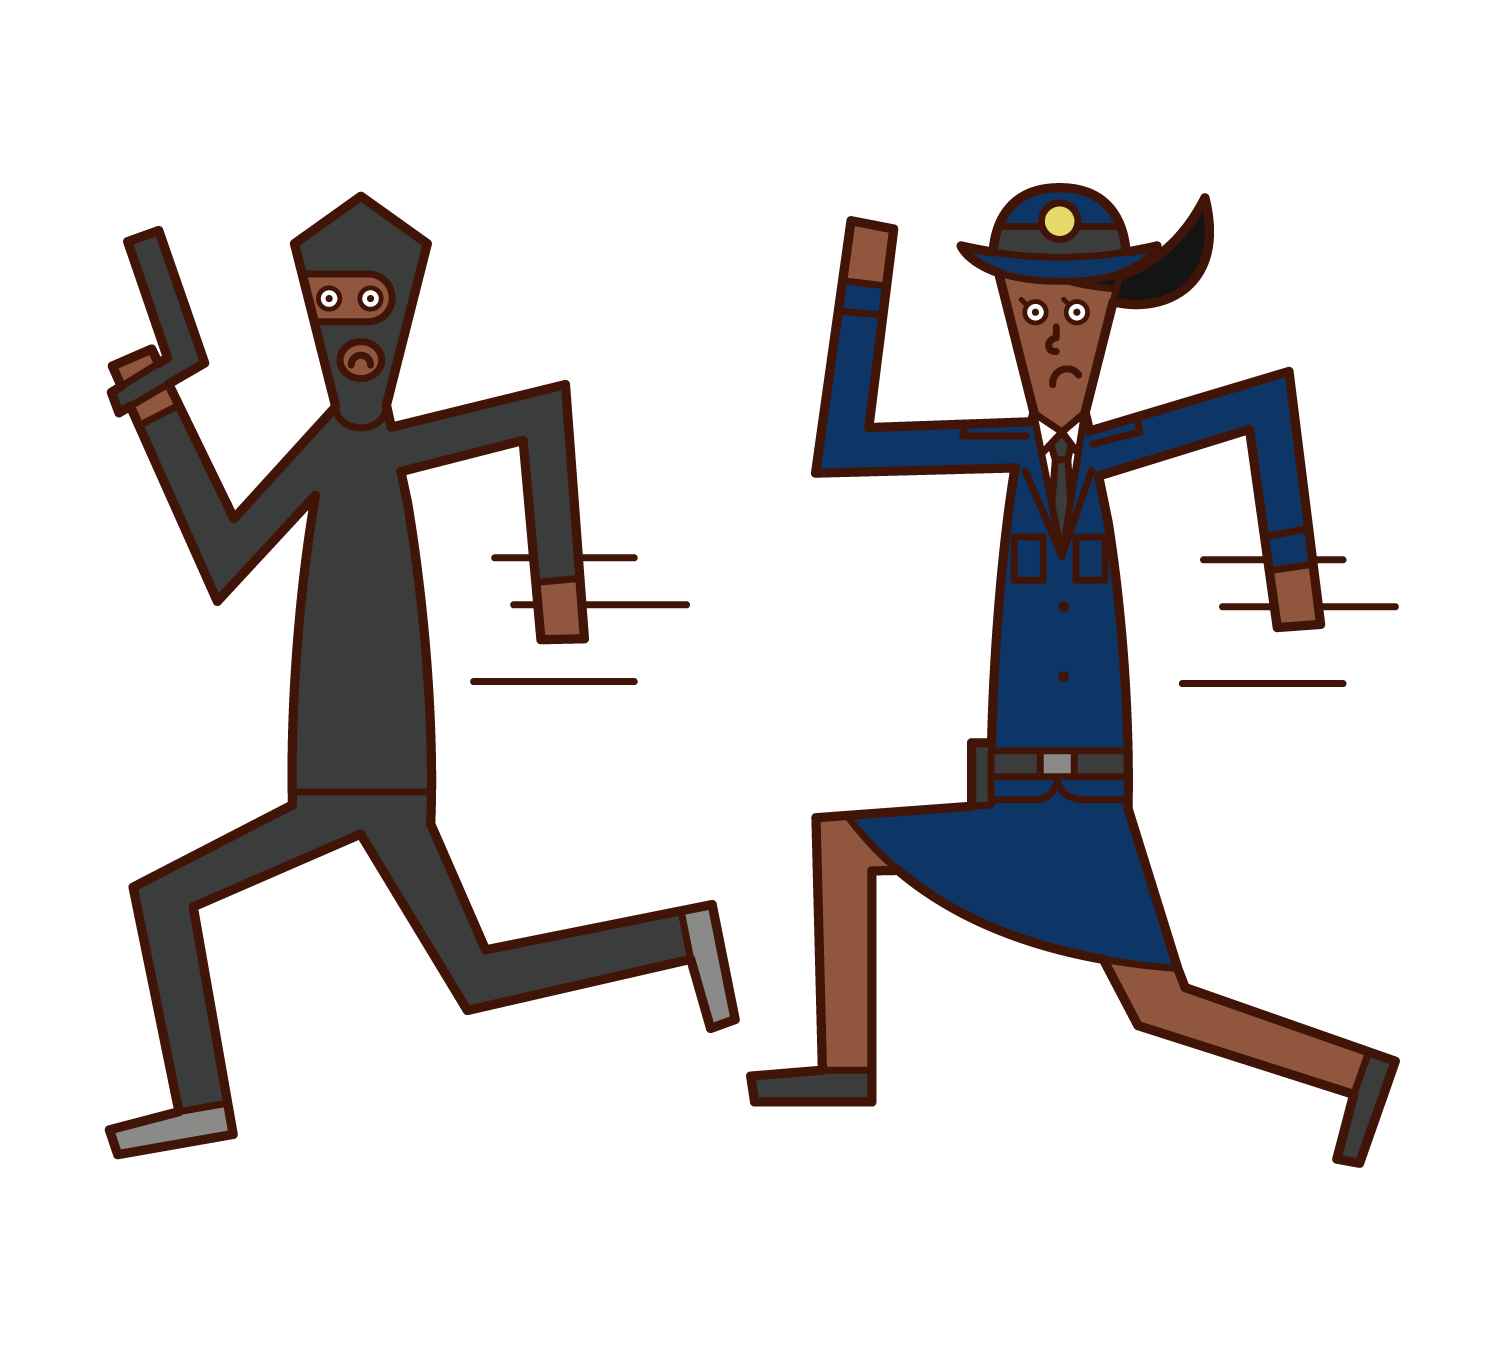 Illustration of a police officer (woman) chasing a thief